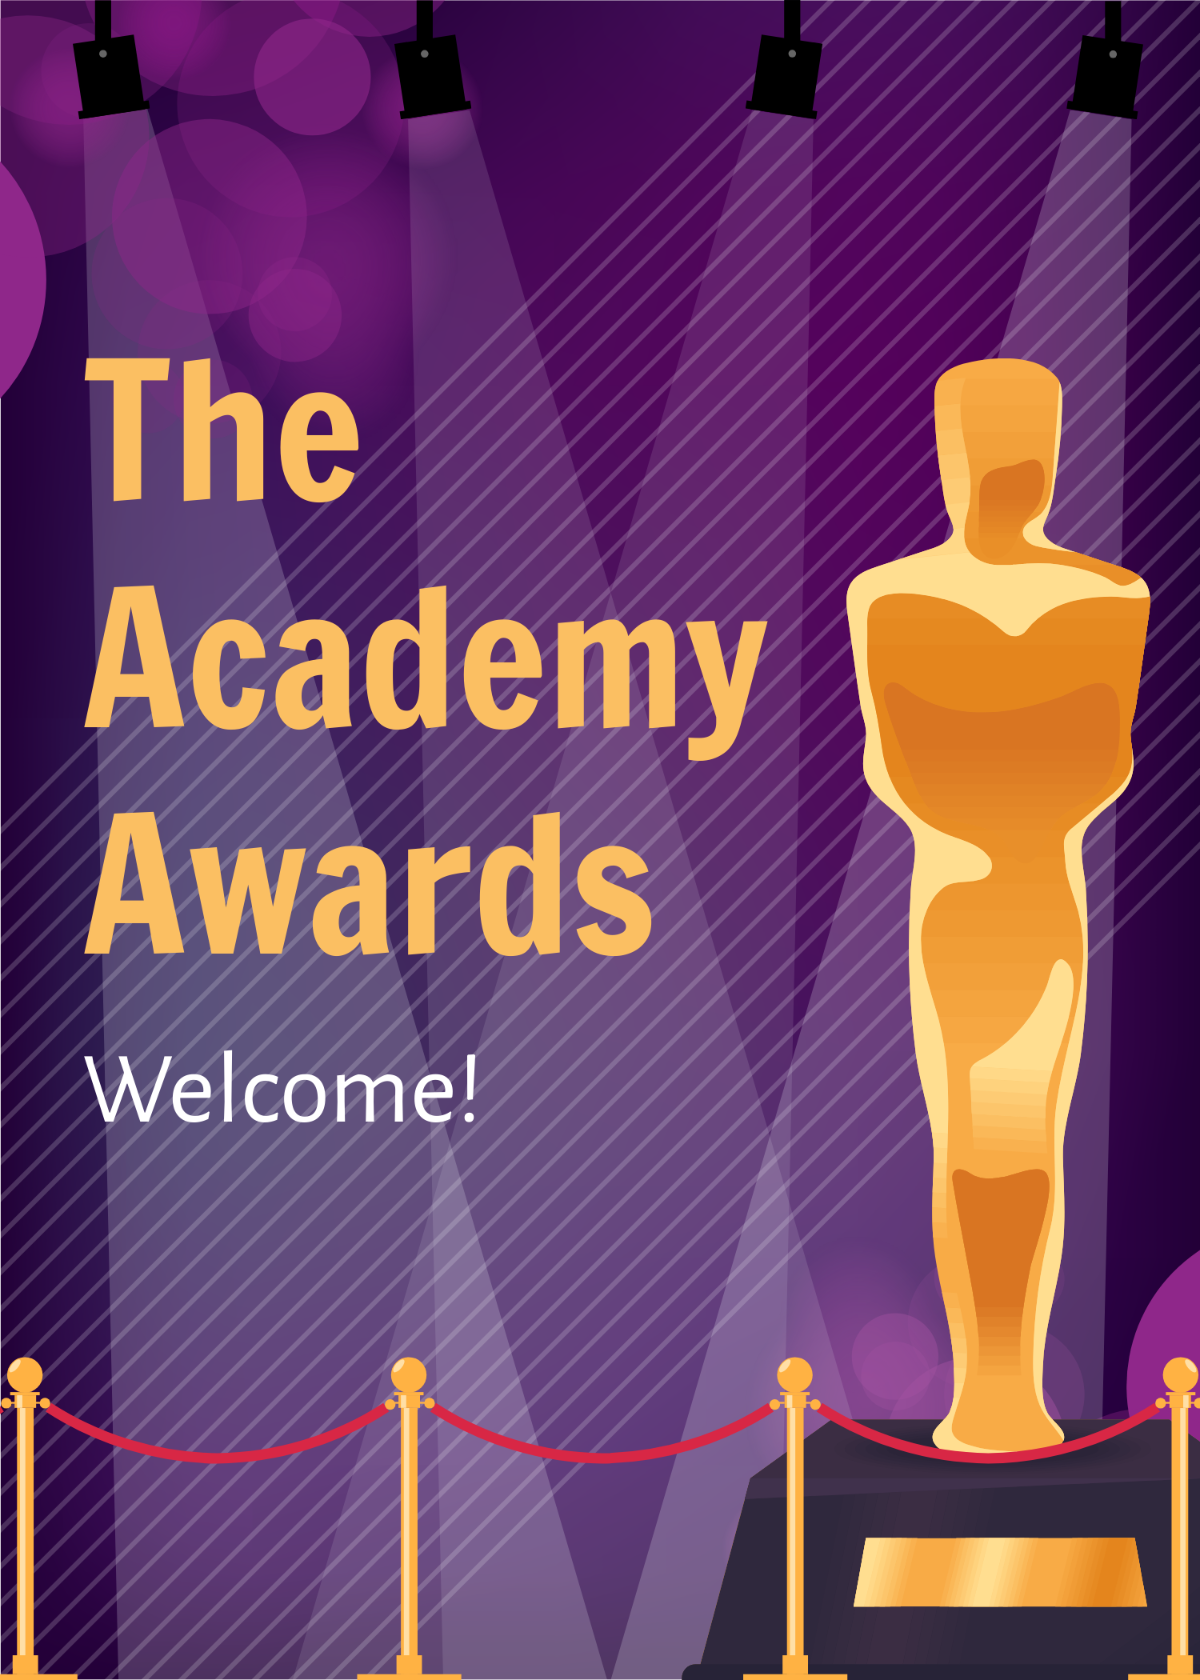 The Academy Awards Greeting Card Template